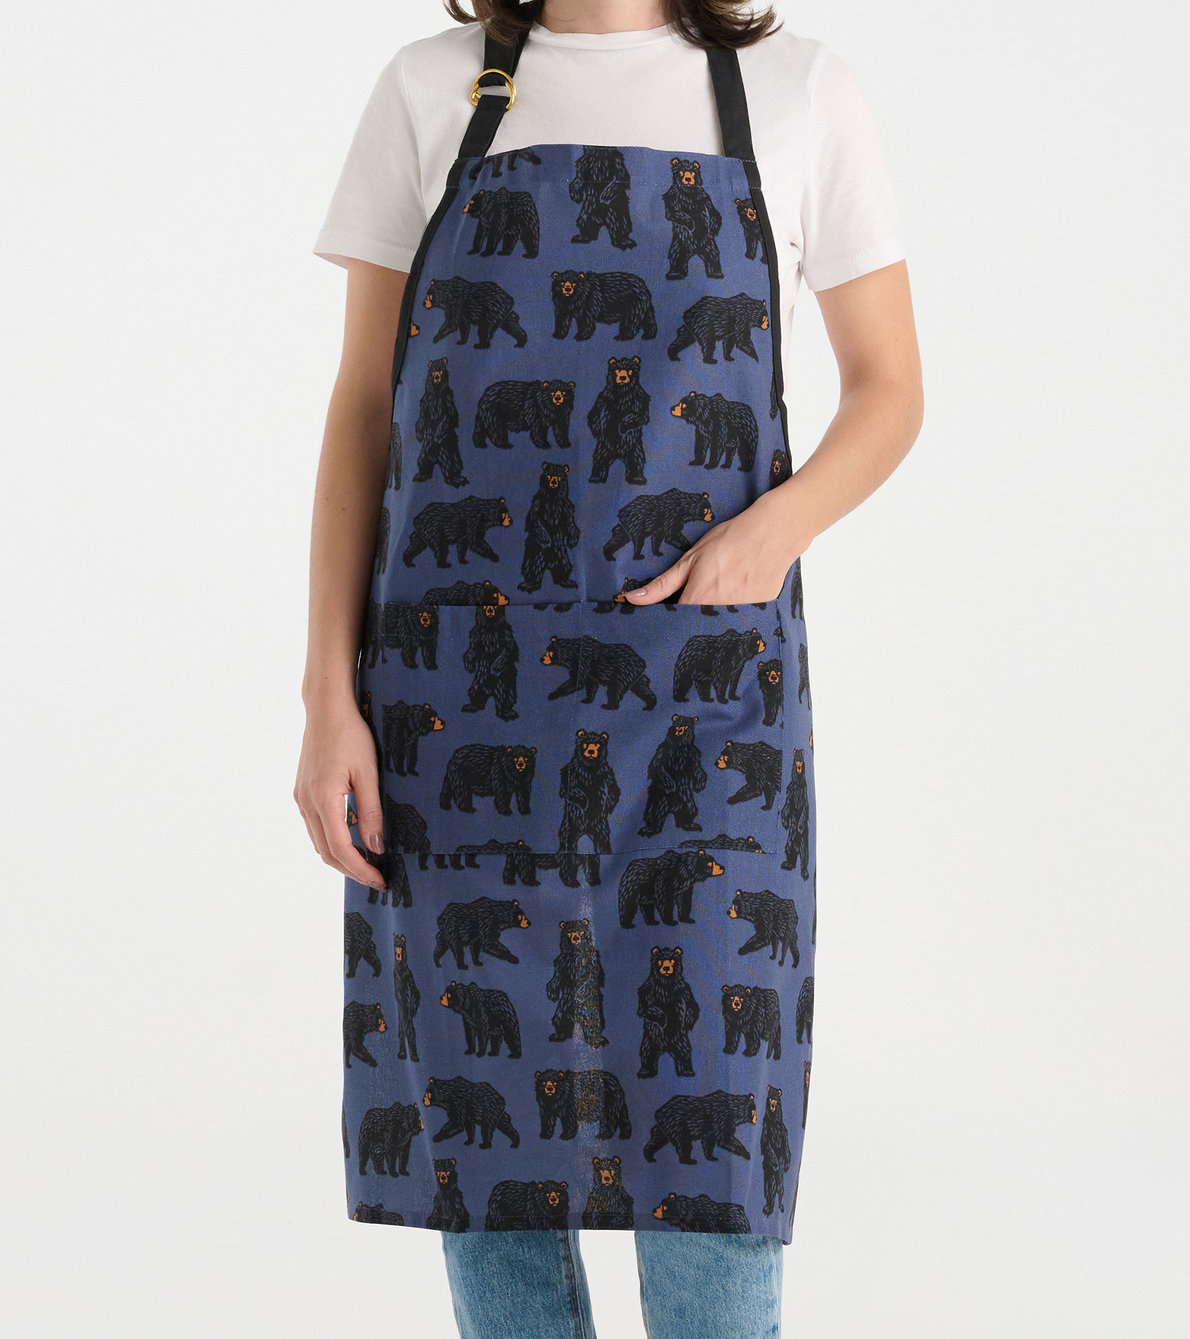 View larger image of Wild Bears Apron